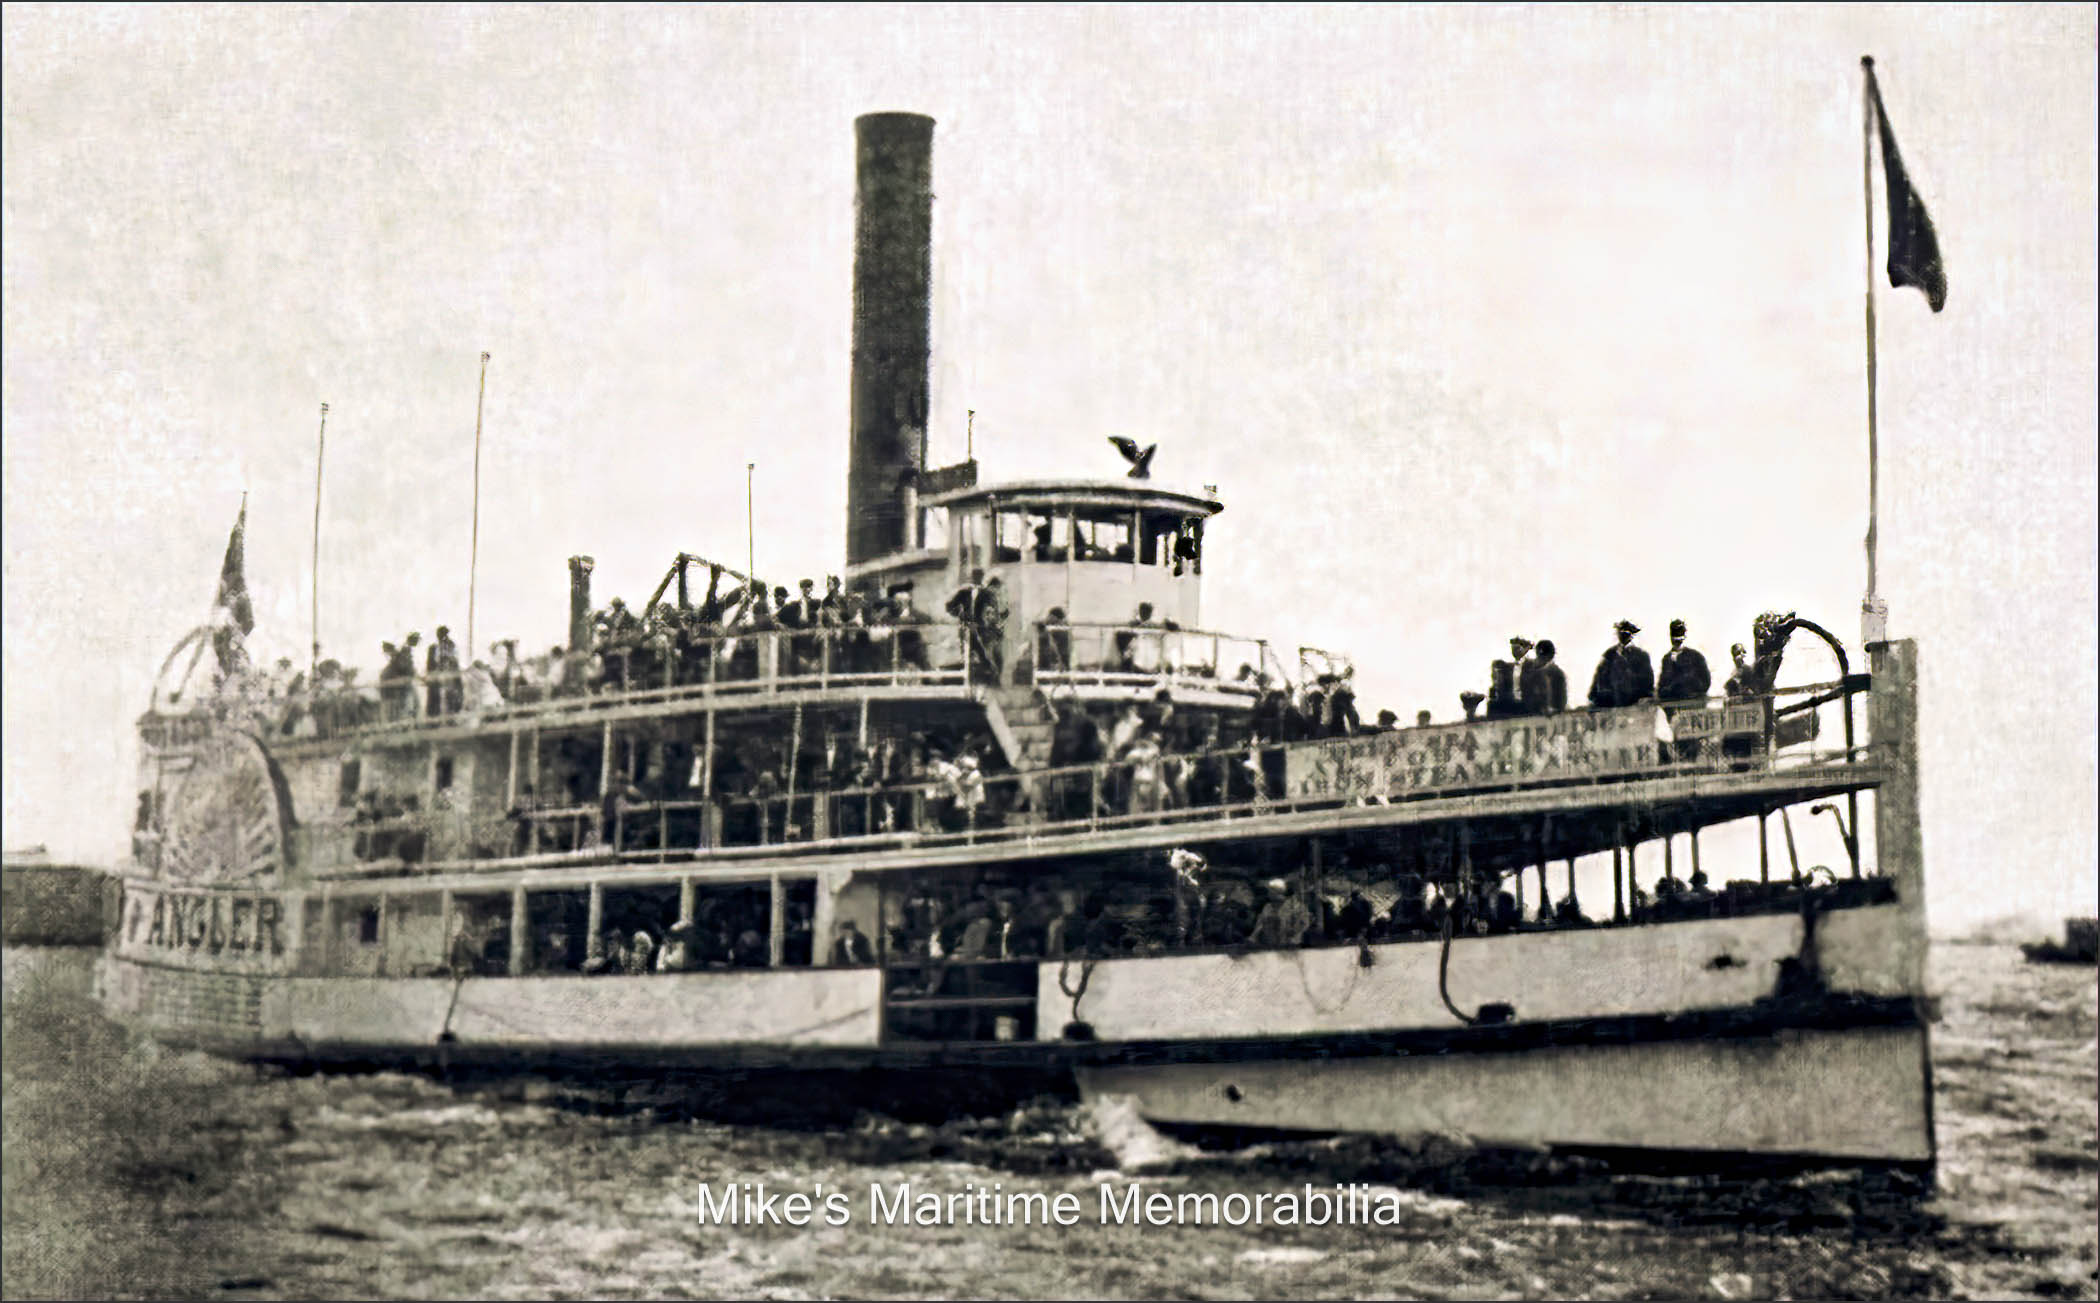 ANGLER, New York, NY – 1905 The "ANGLER" is seen here departing Manhattan's East River underway to the local fishing banks. This 166-foot side-wheeler was built in 1878 at Wilmington, DE as the excursion vessel "MARY MORGAN". She became the "ANGLER" in 1888 under the command of Captain Albert Foster. Captain Foster was one of the first true deep sea party boat captains and fishing pilots and is arguably the greatest party boat captain of all time. He was responsible for locating and naming several of the New York Bight's best fishing grounds including "Seventeen Fathoms".